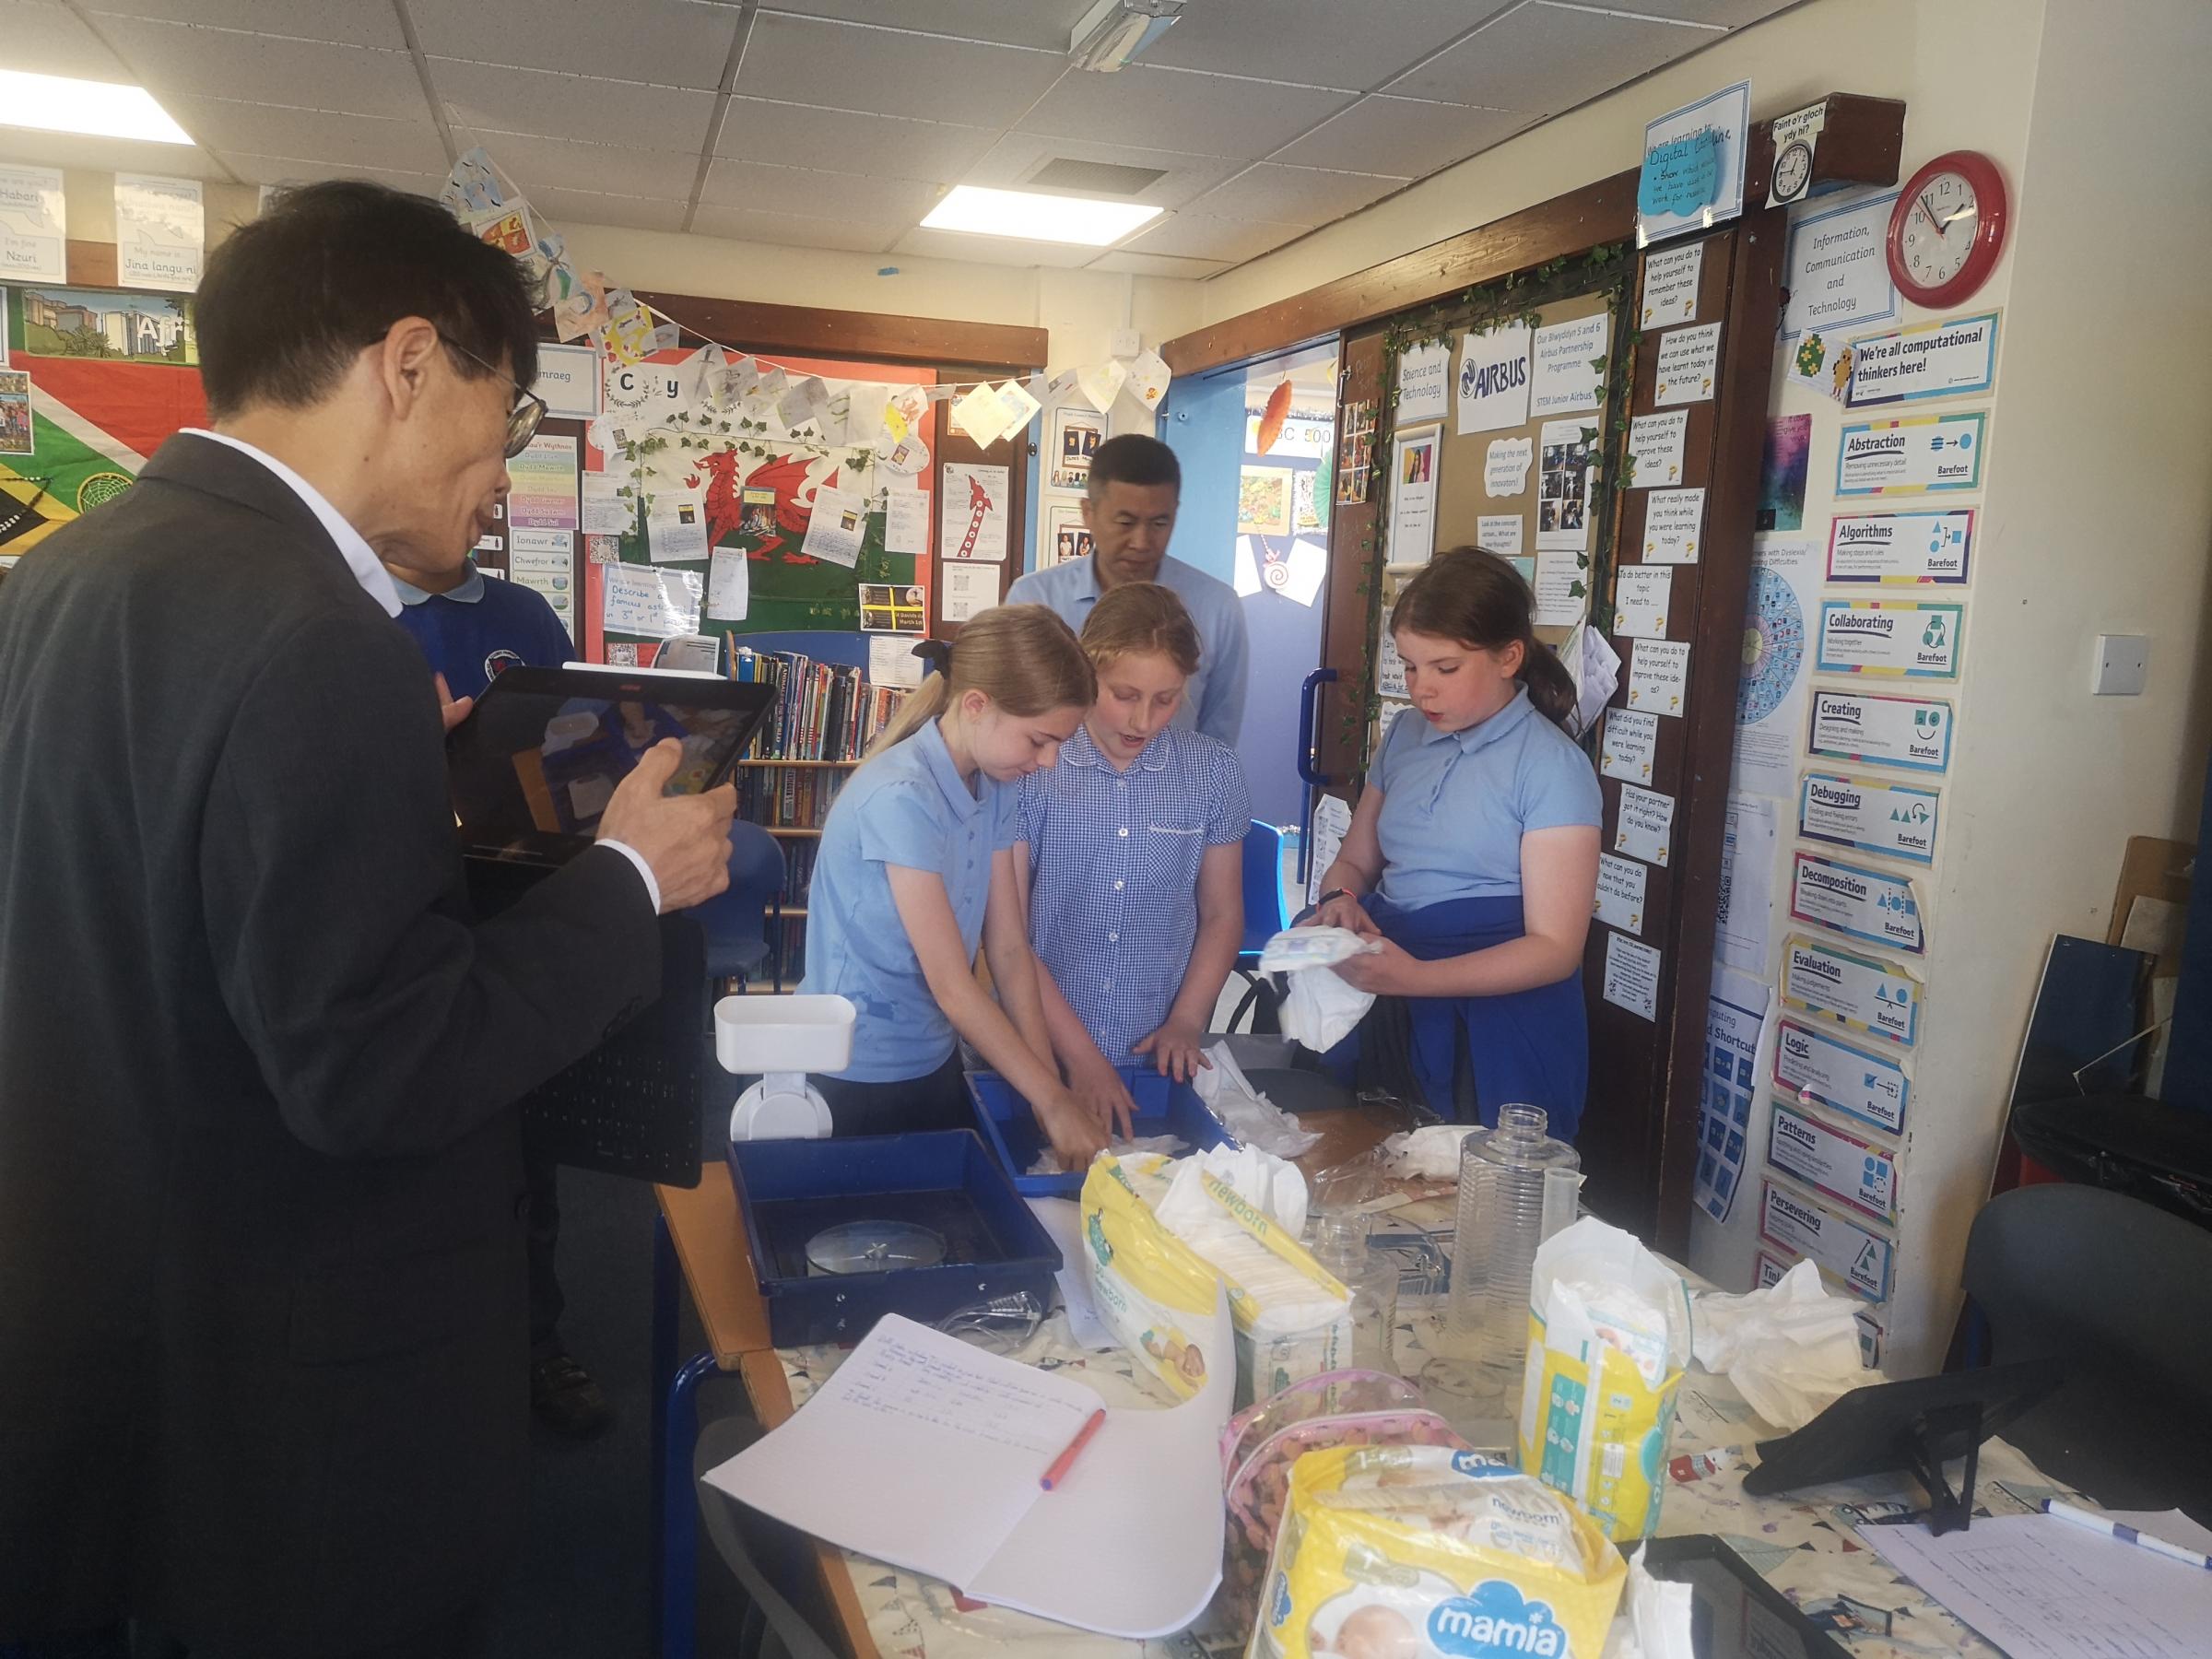 A delegation from China visited Penarlag Primary School do observe how science is taught.